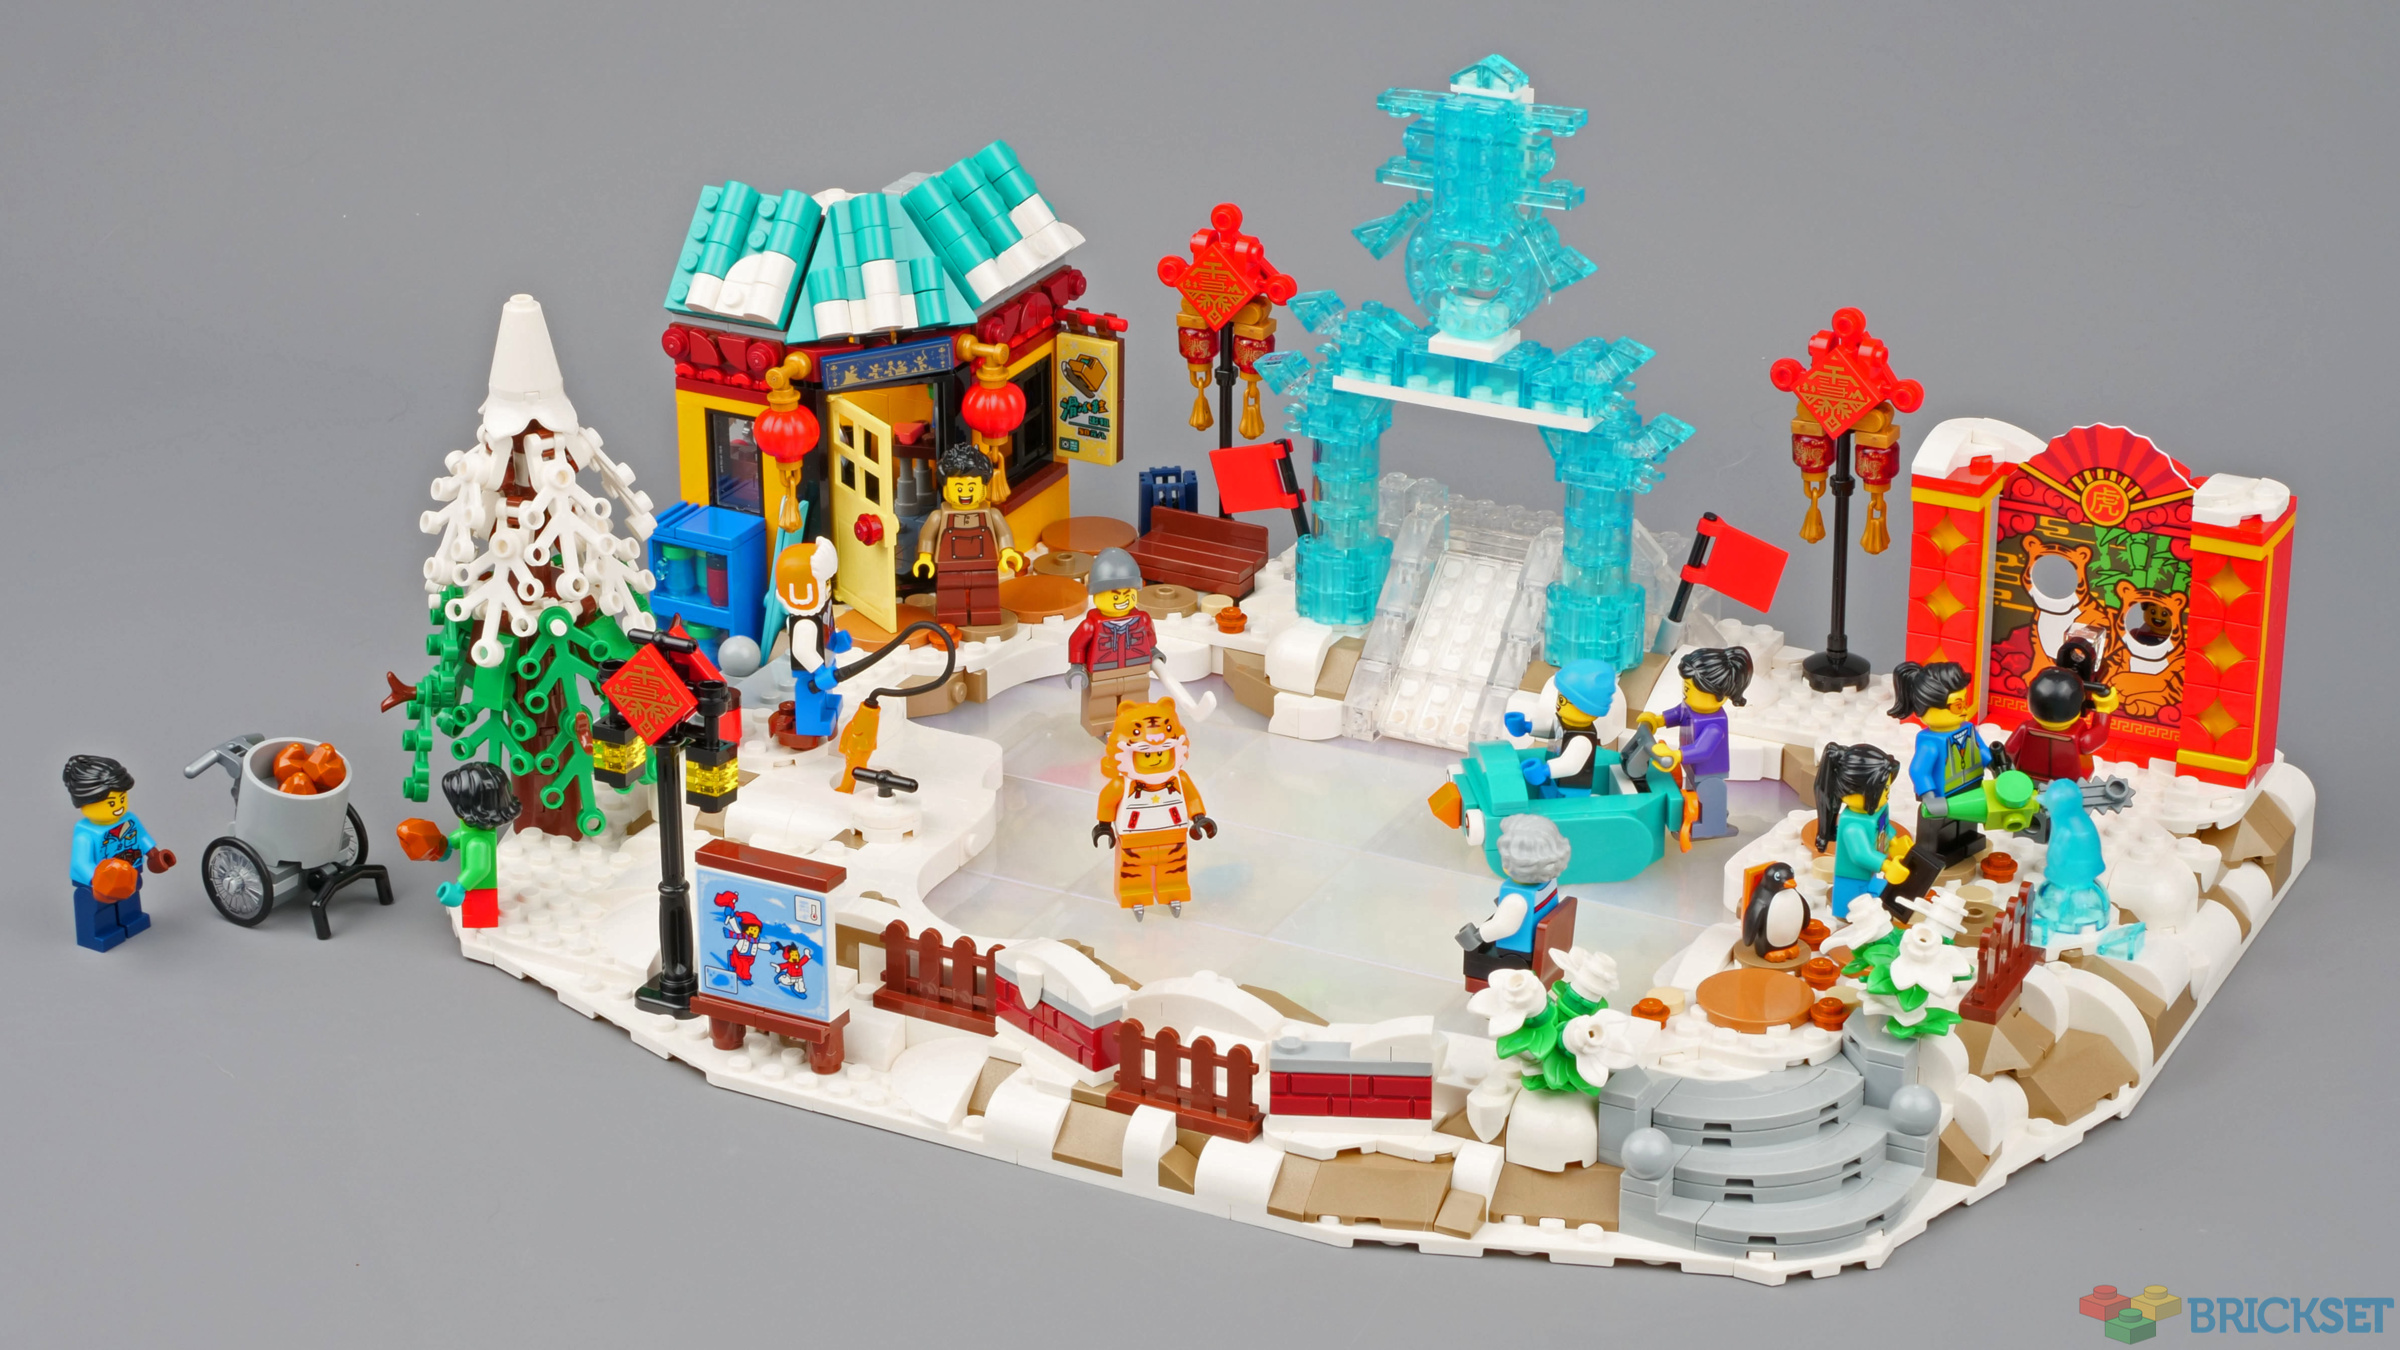 LEGO 80109 Lunar New Year Ice Festival review